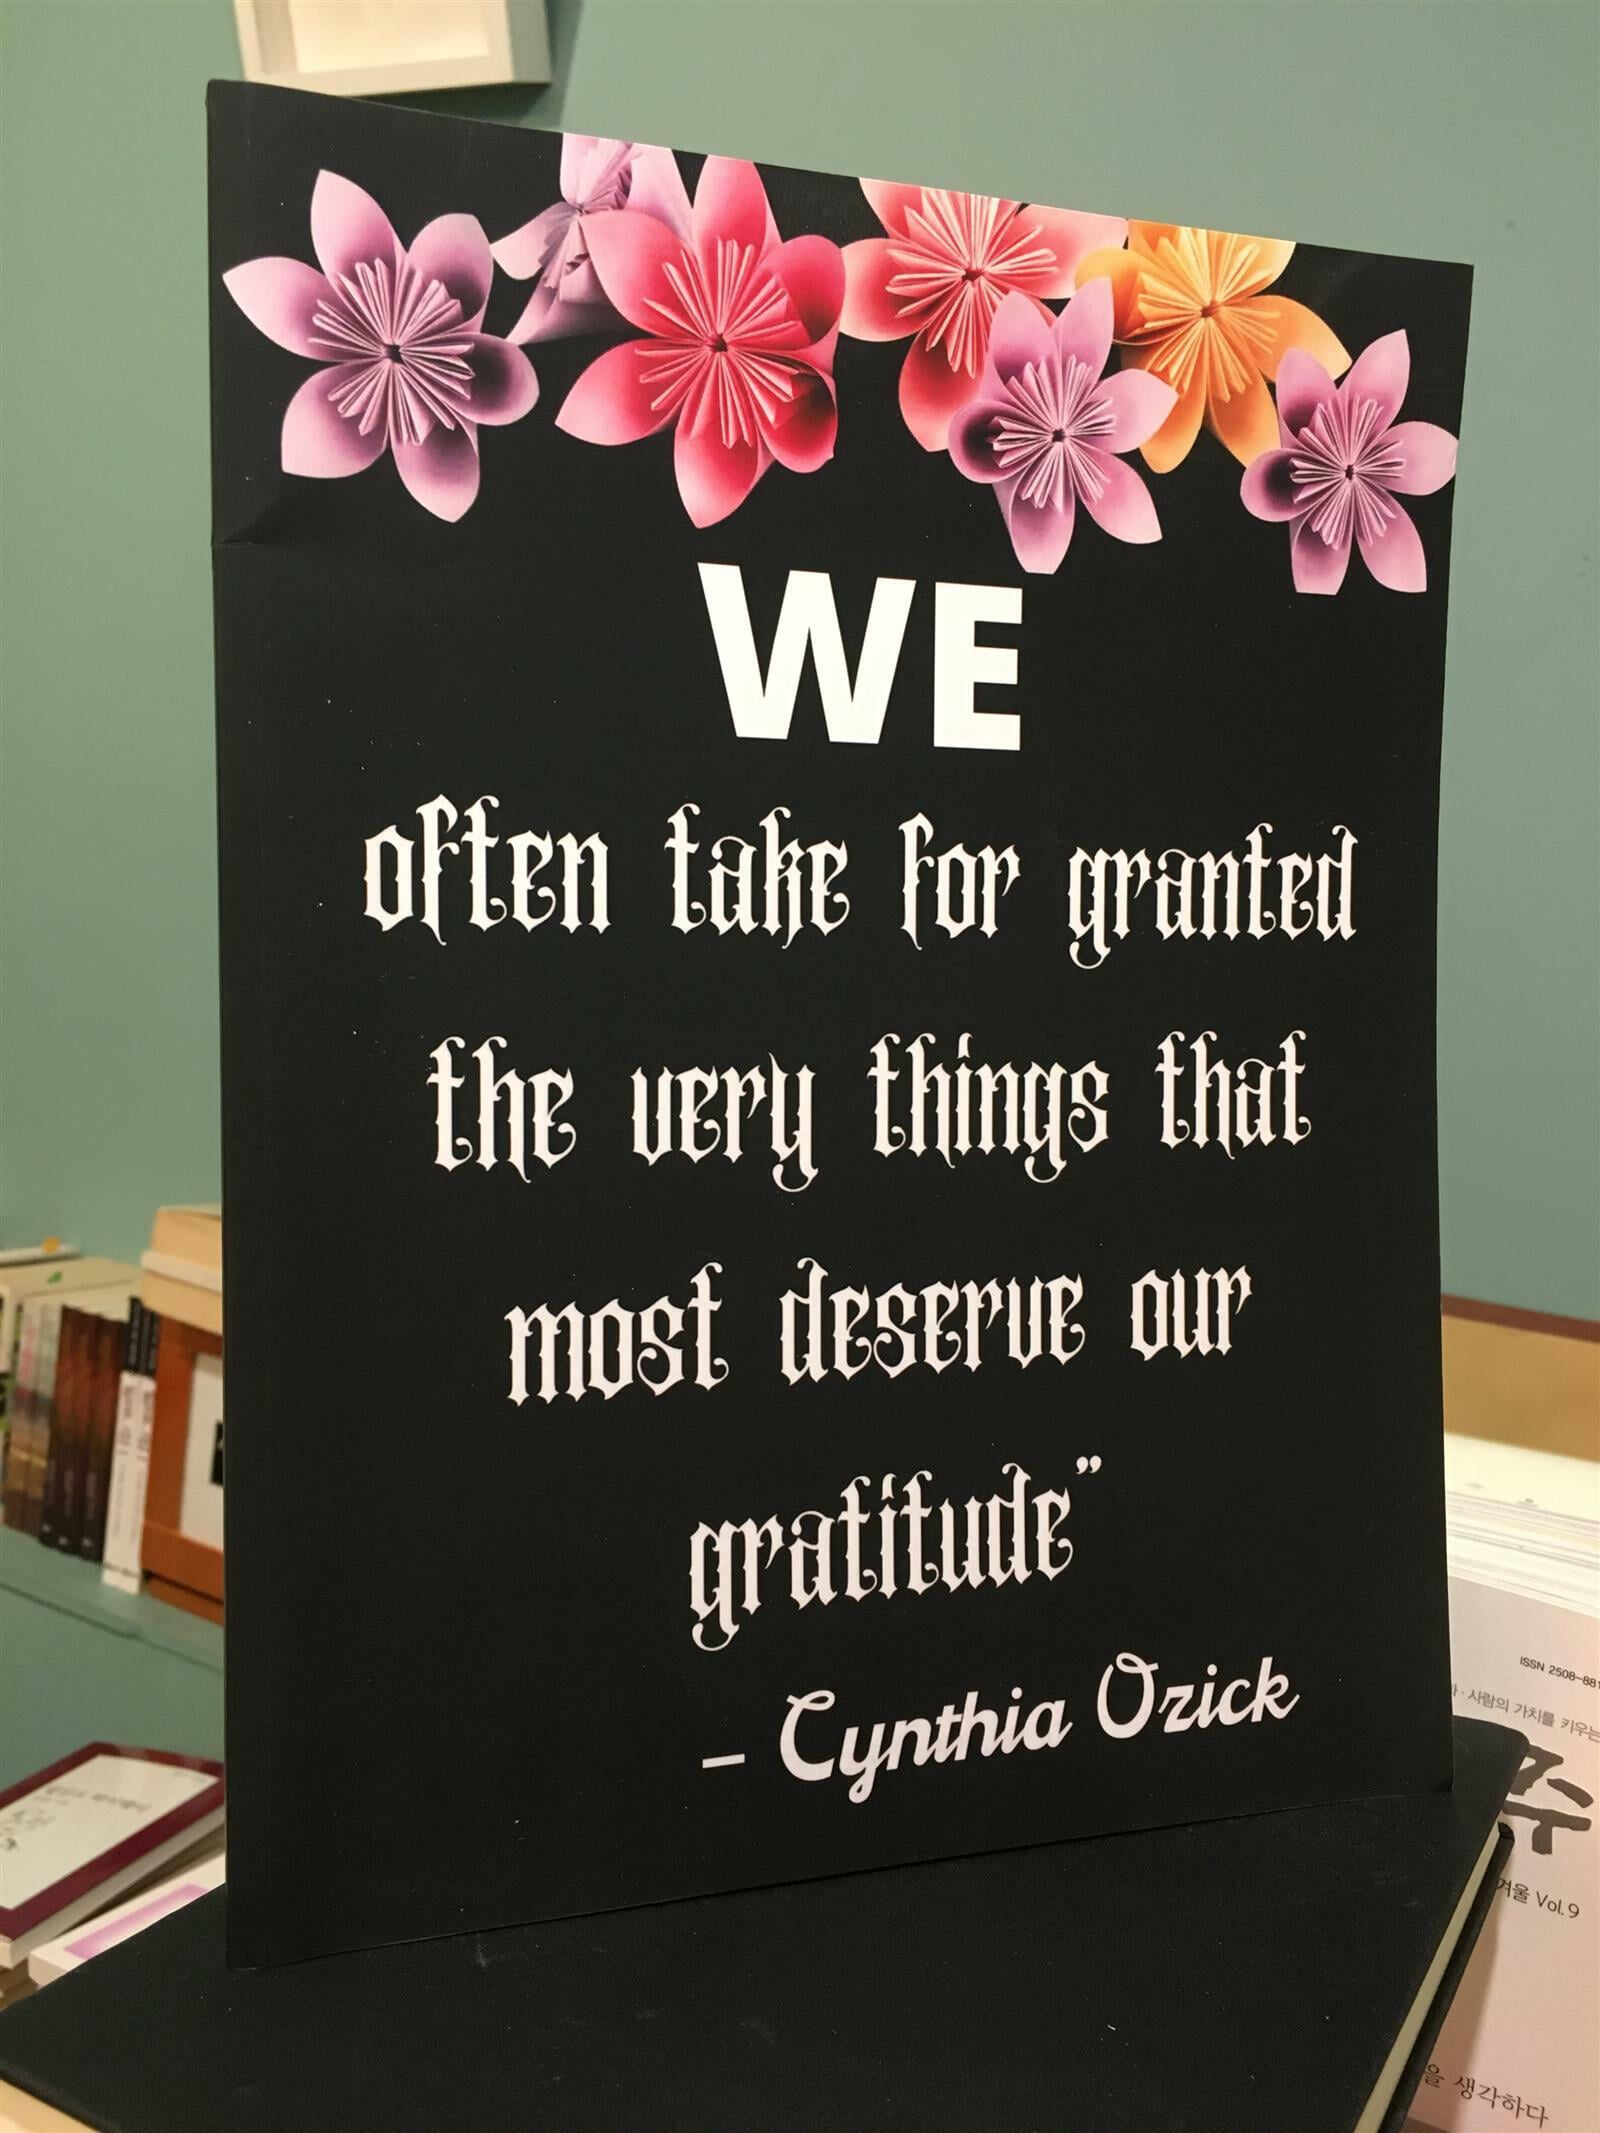 We often take for granted the very things that most deserve our gratitude˝ - Cynthia Ozick: A 52 Week Guide To Cultivate An Attitude Of Gratitude